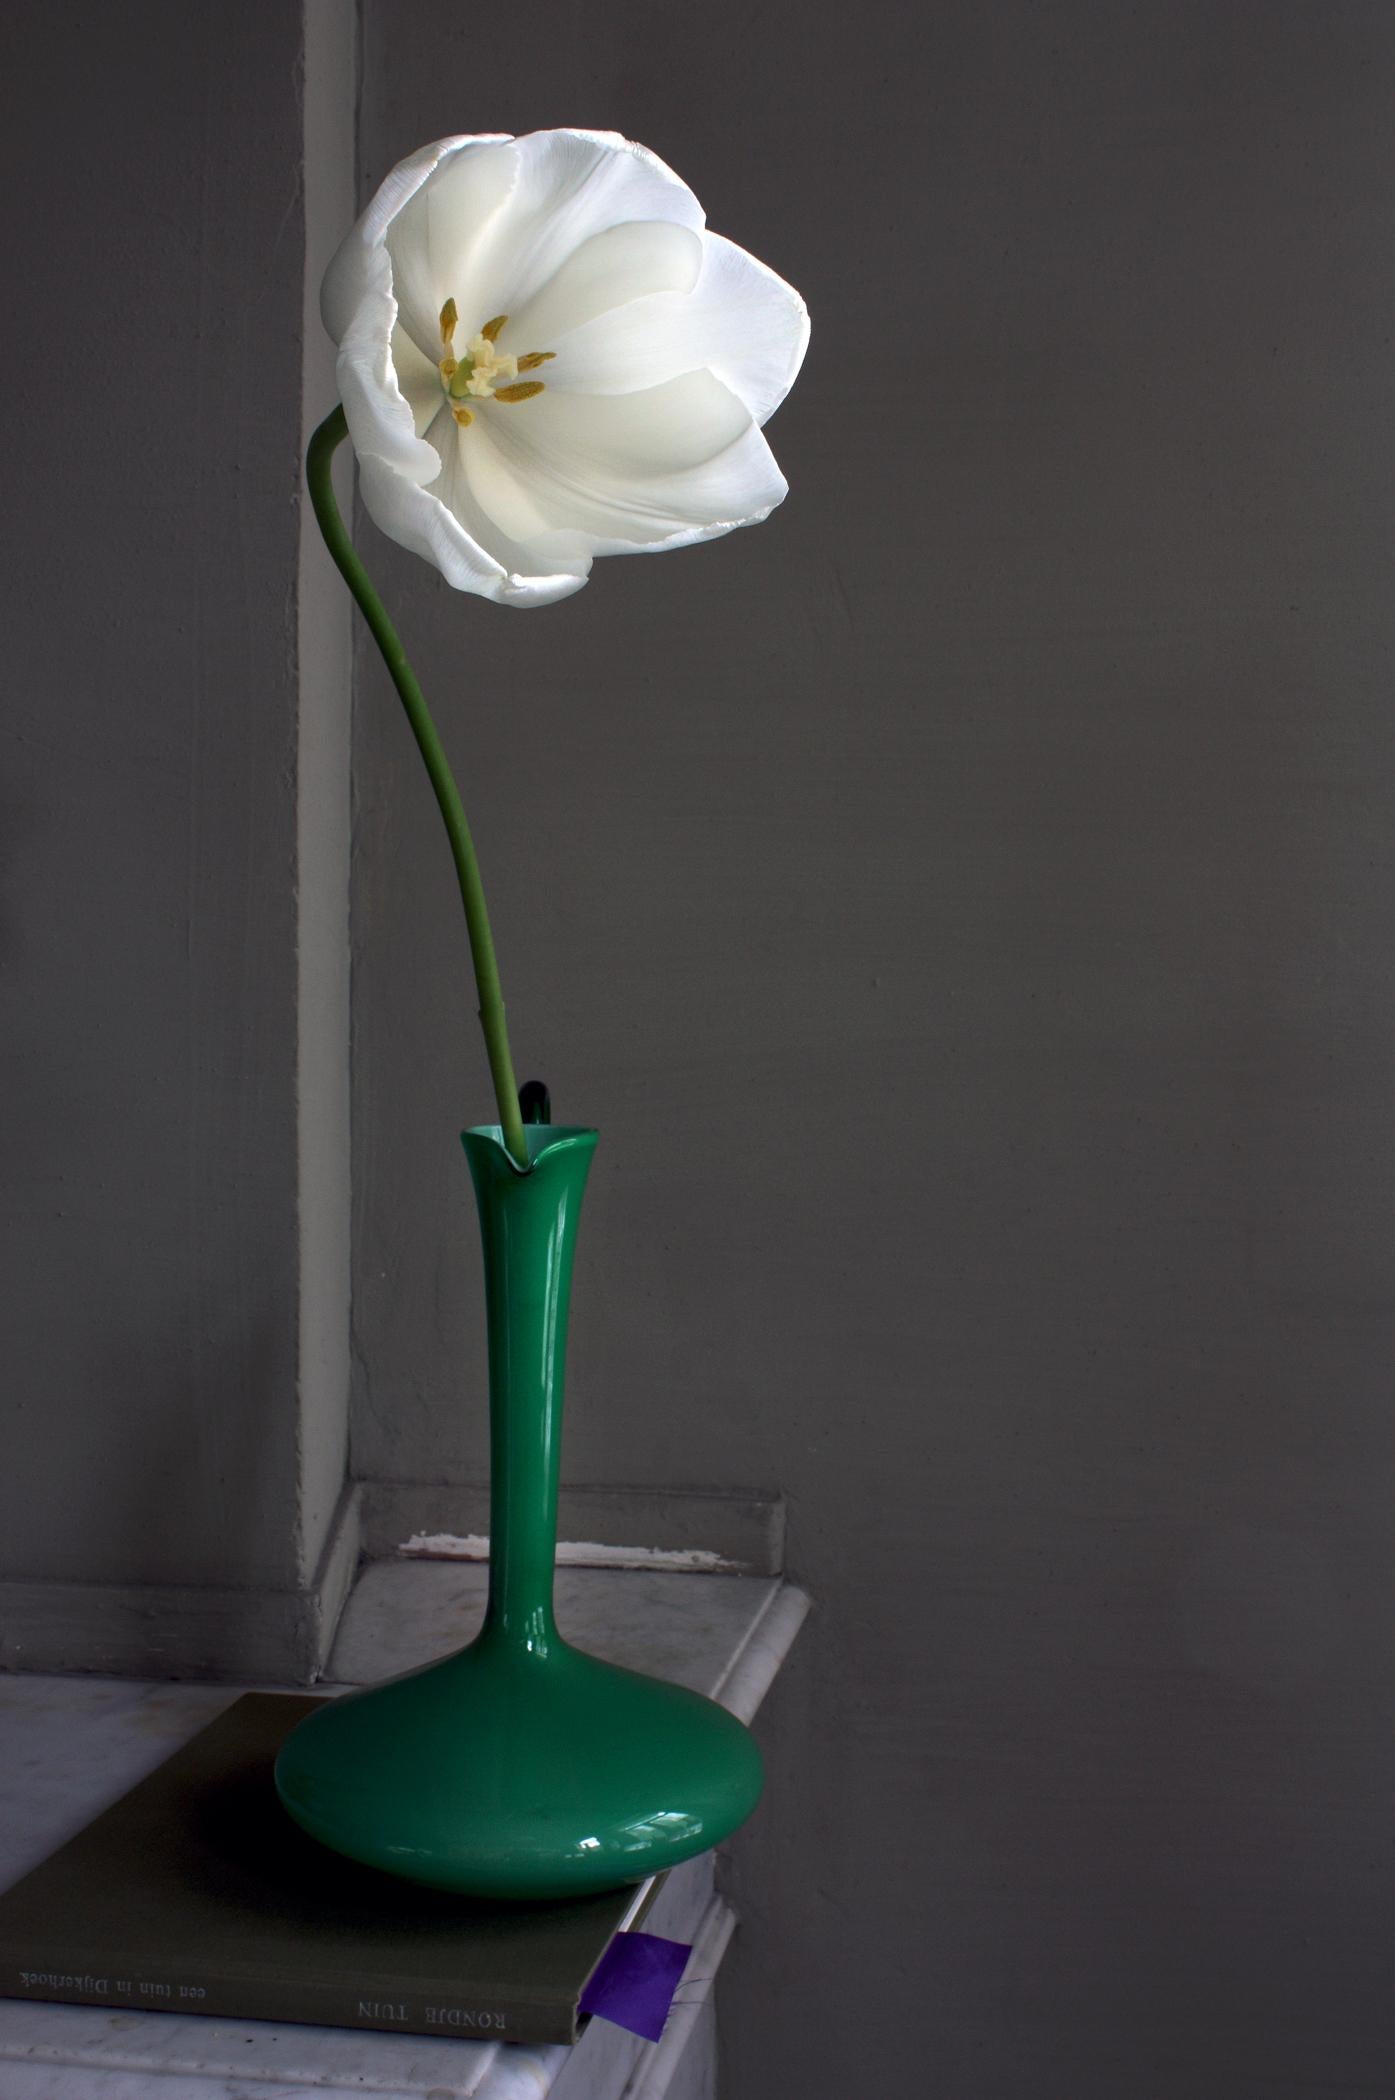 Still life with a White Tulip and a Green Opalina Vase, Antwerp, 2012 by Michael James O’Brien
From Opalina series.
Archival Pigment prints
Printed on Hahnemuhle fine art paper
Image size: 36 in. H x 24 in. W 
Edition of 20 +